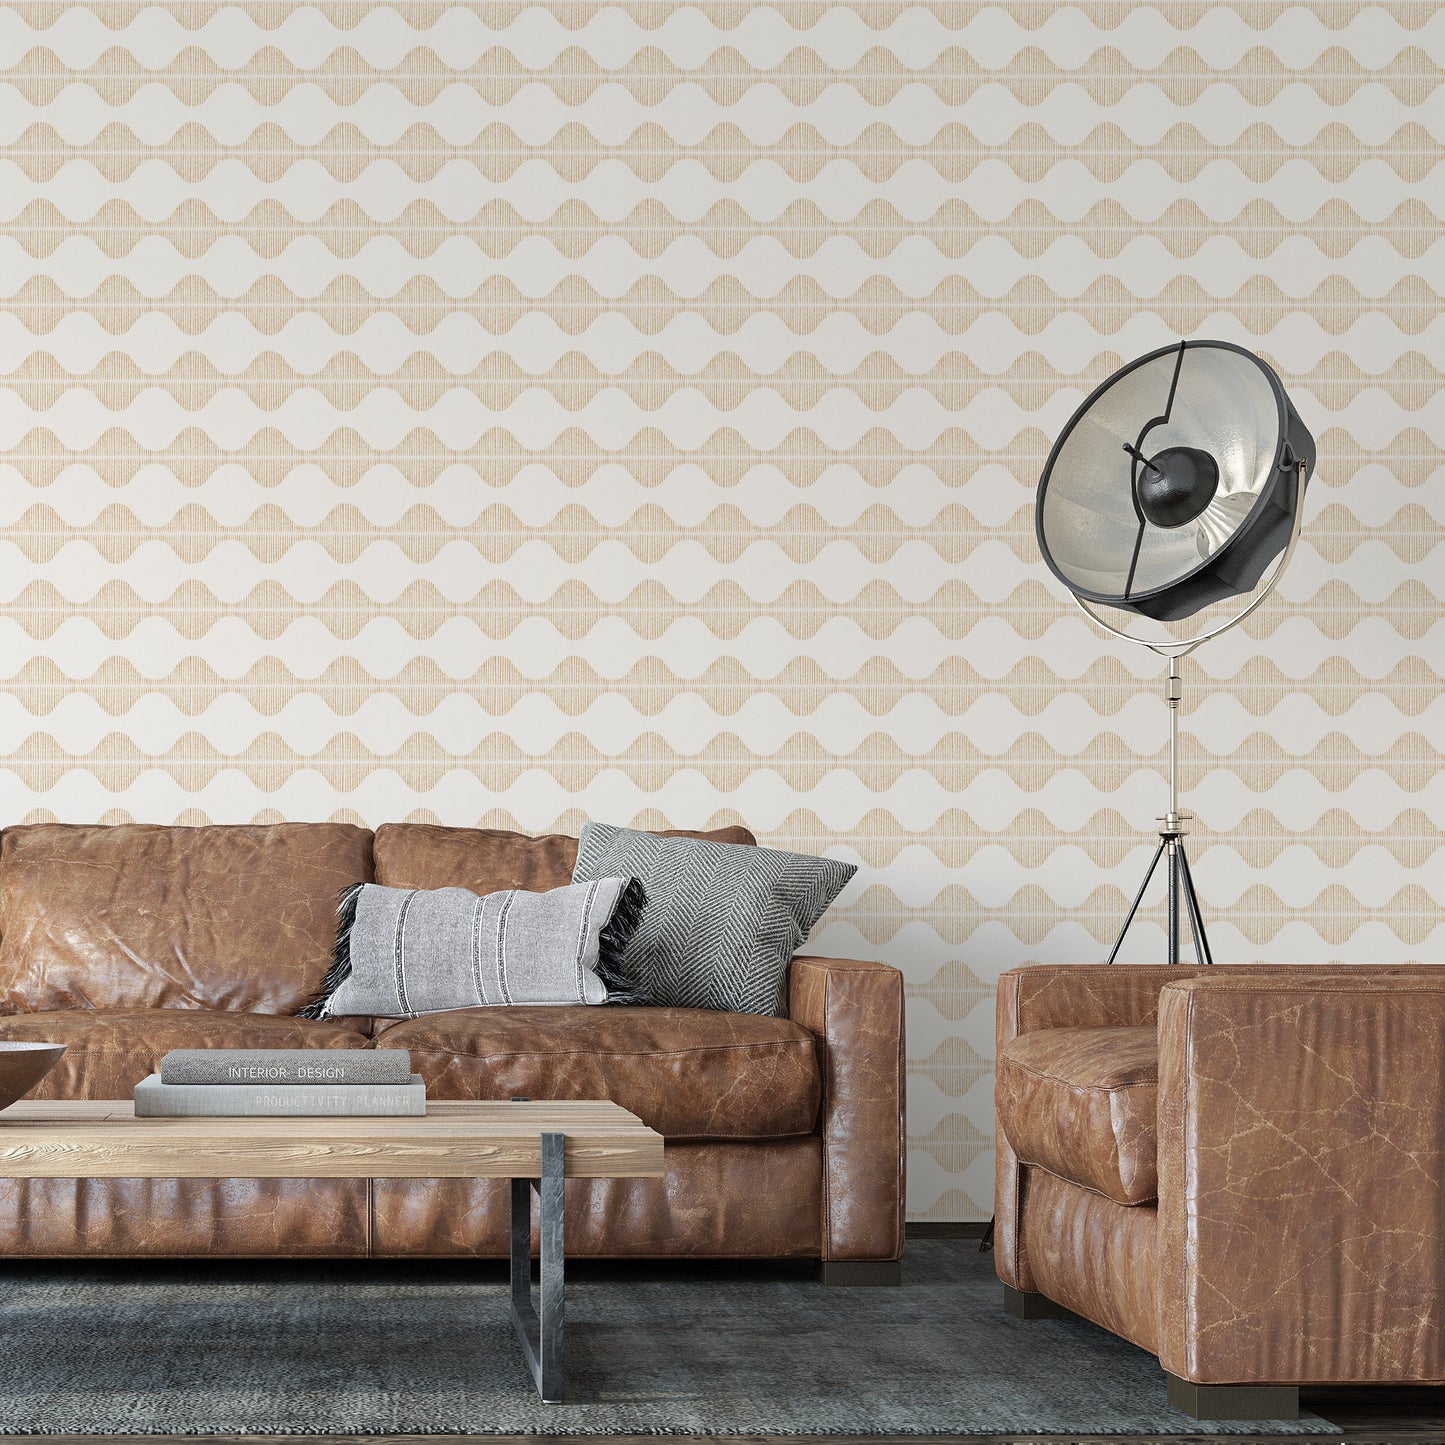 Bring a wave of modern beauty to any room with this stunning Wavy Line Art Wallpaper! The subtle tawny on cream design is completely gorgeous and sure to make a statement in any space. 